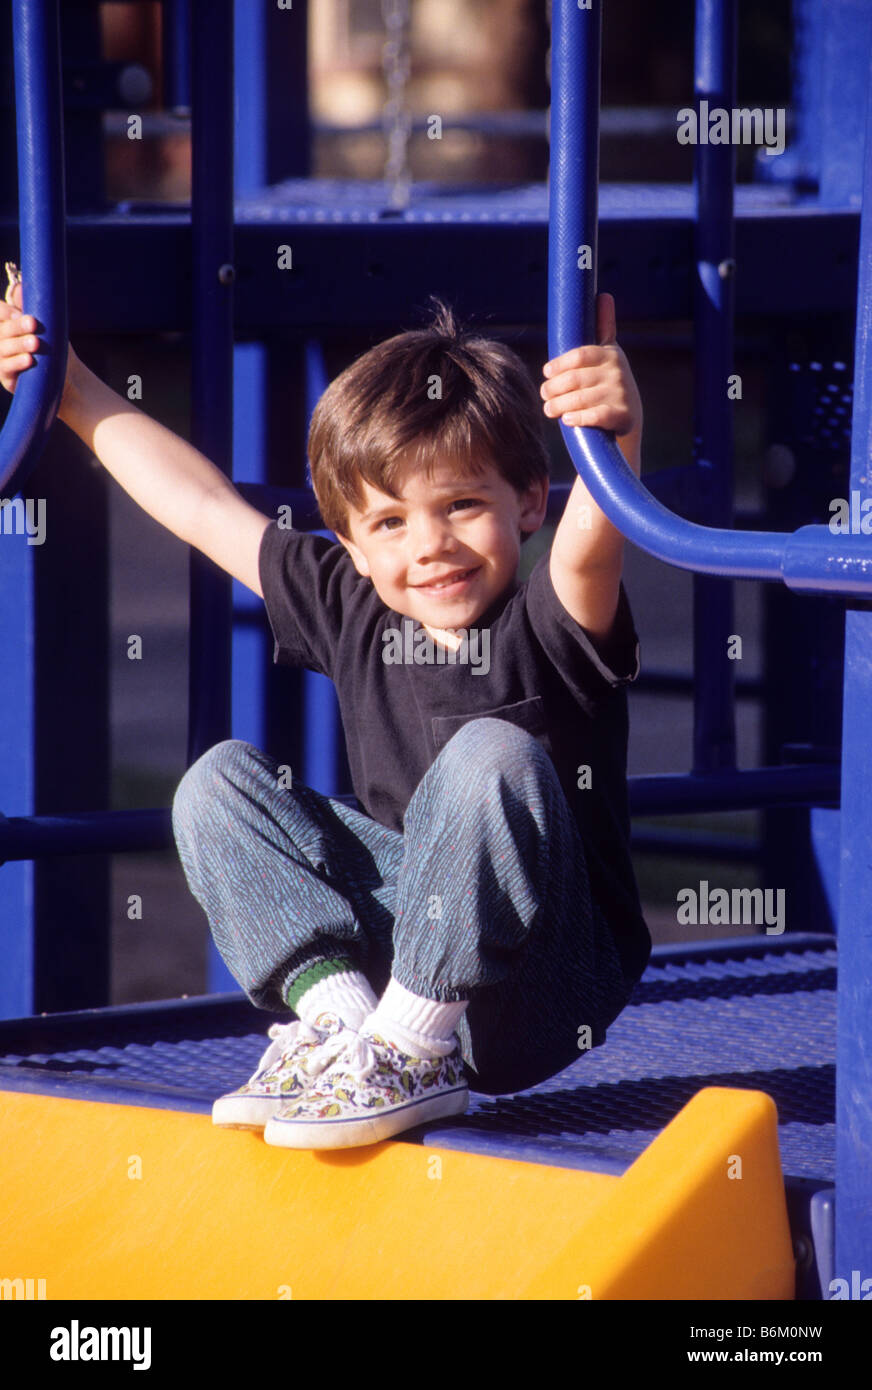 Young boy smiles as he prepares to slide down playground equipment in park. Stock Photo